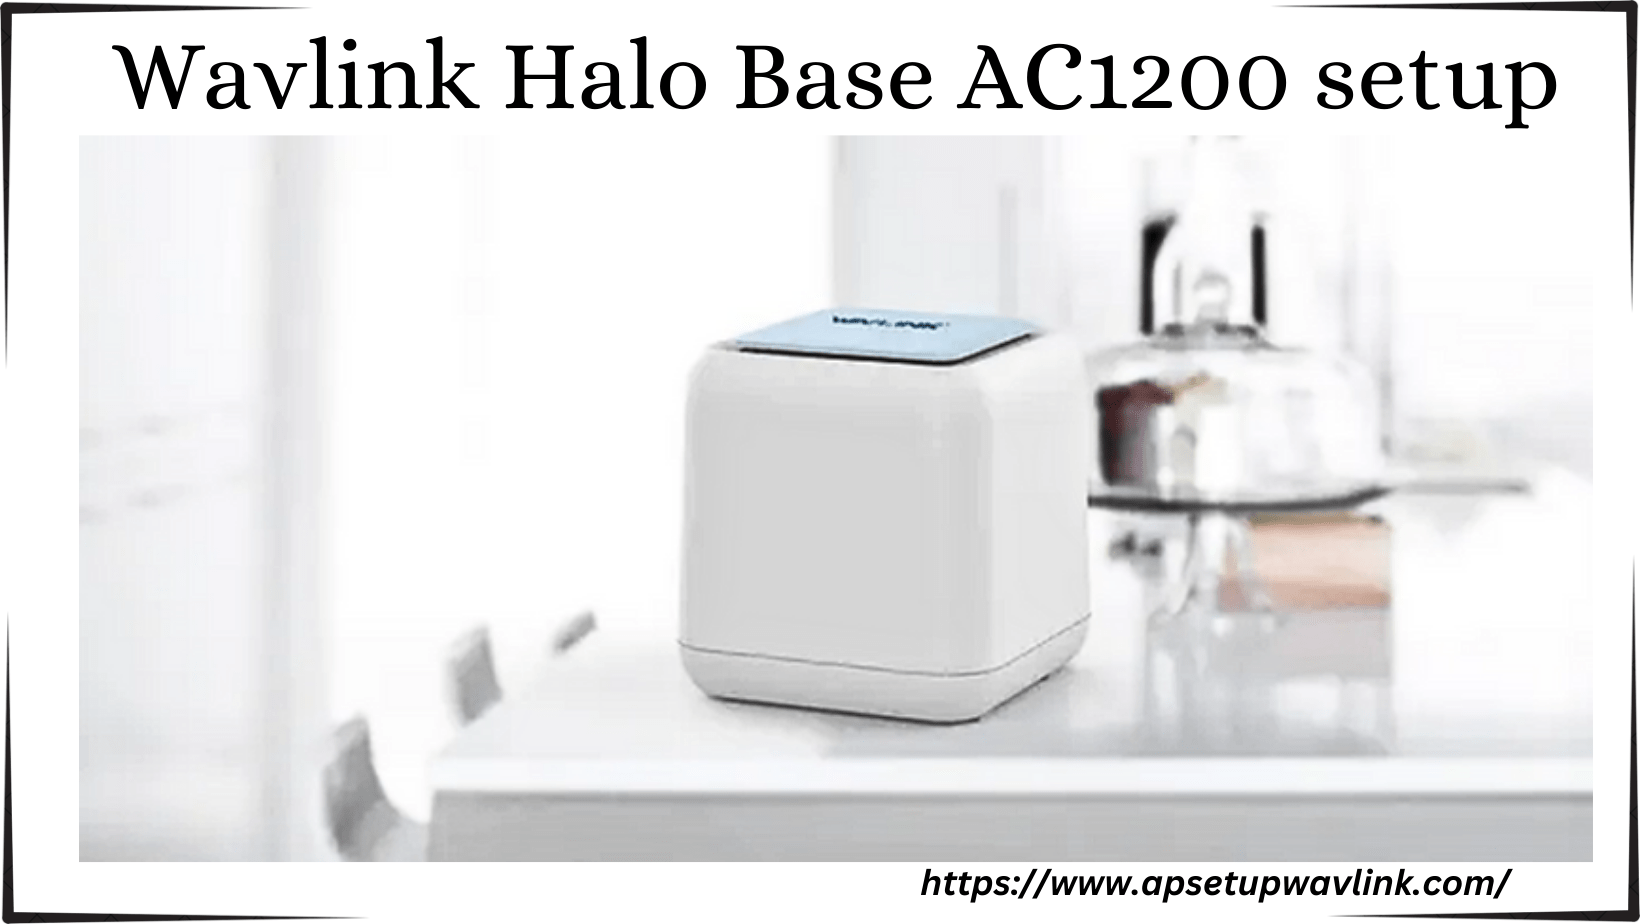 You are currently viewing Wavlink Halo Base AC1200 setup